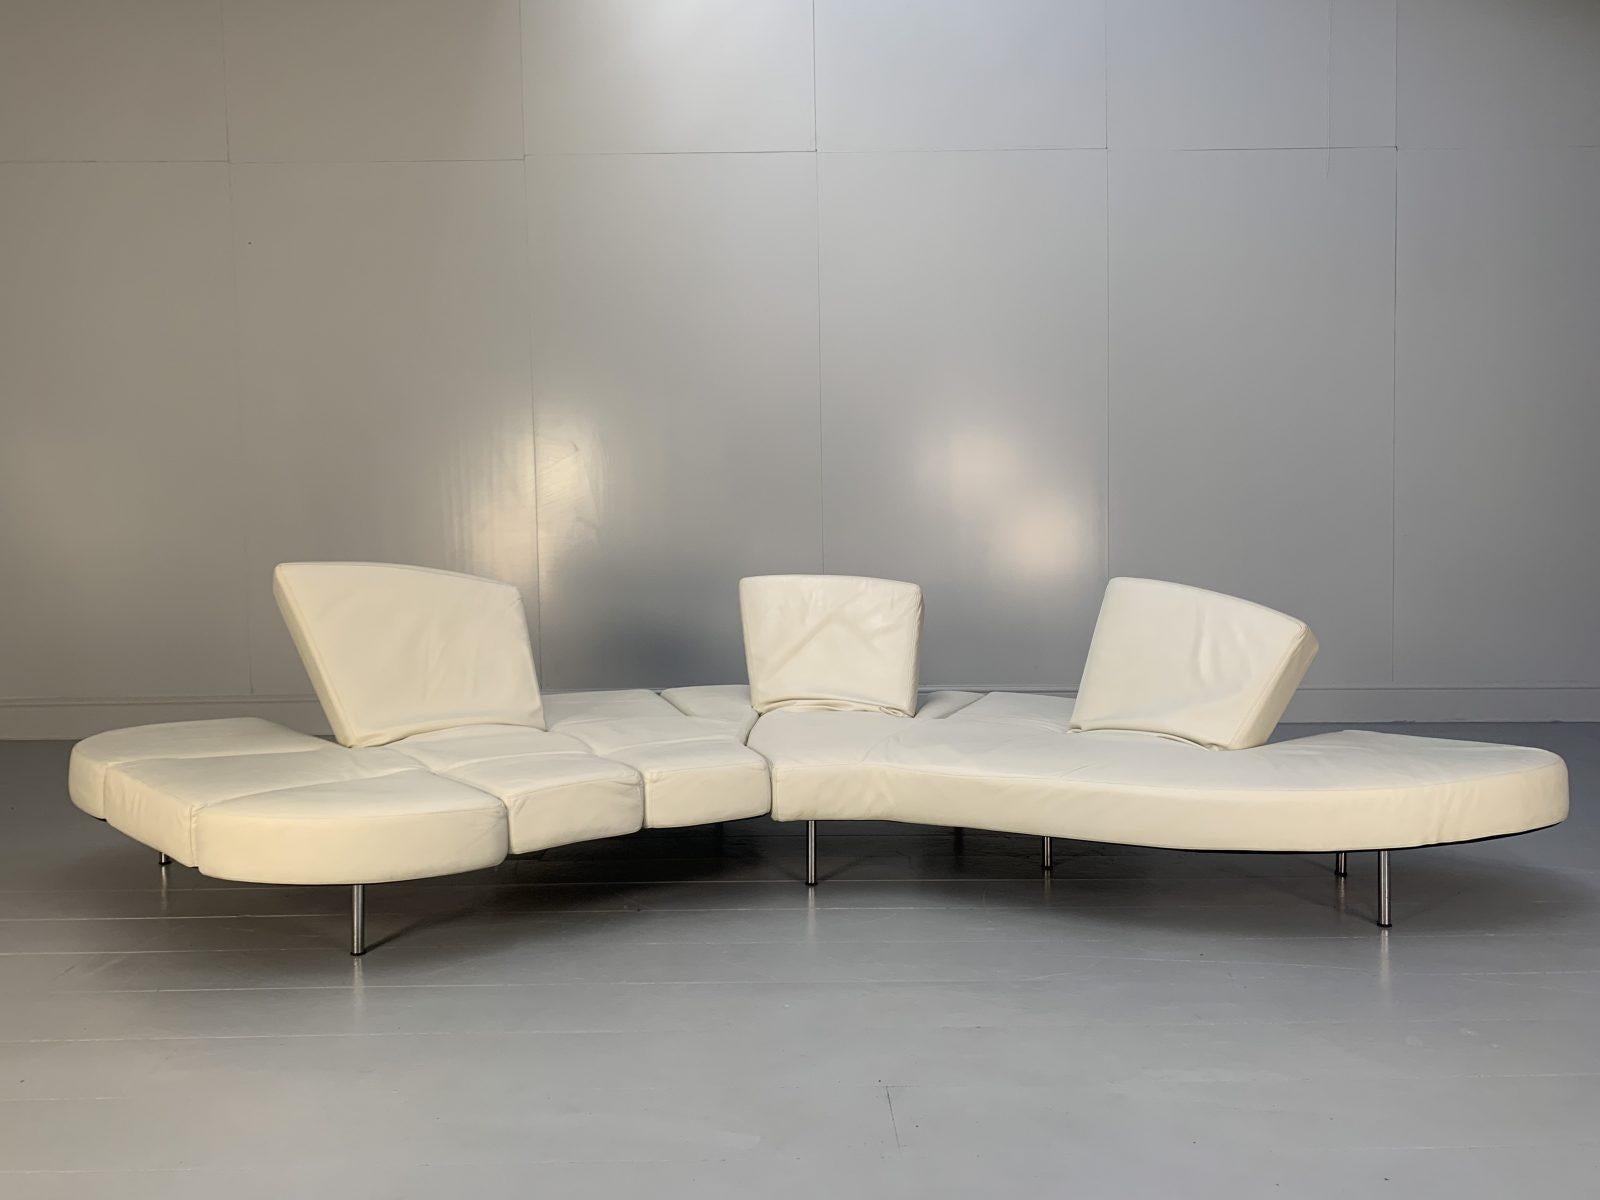 Edra “Flap FLP010 SX” Sofa – In White Leather In Good Condition For Sale In Barrowford, GB